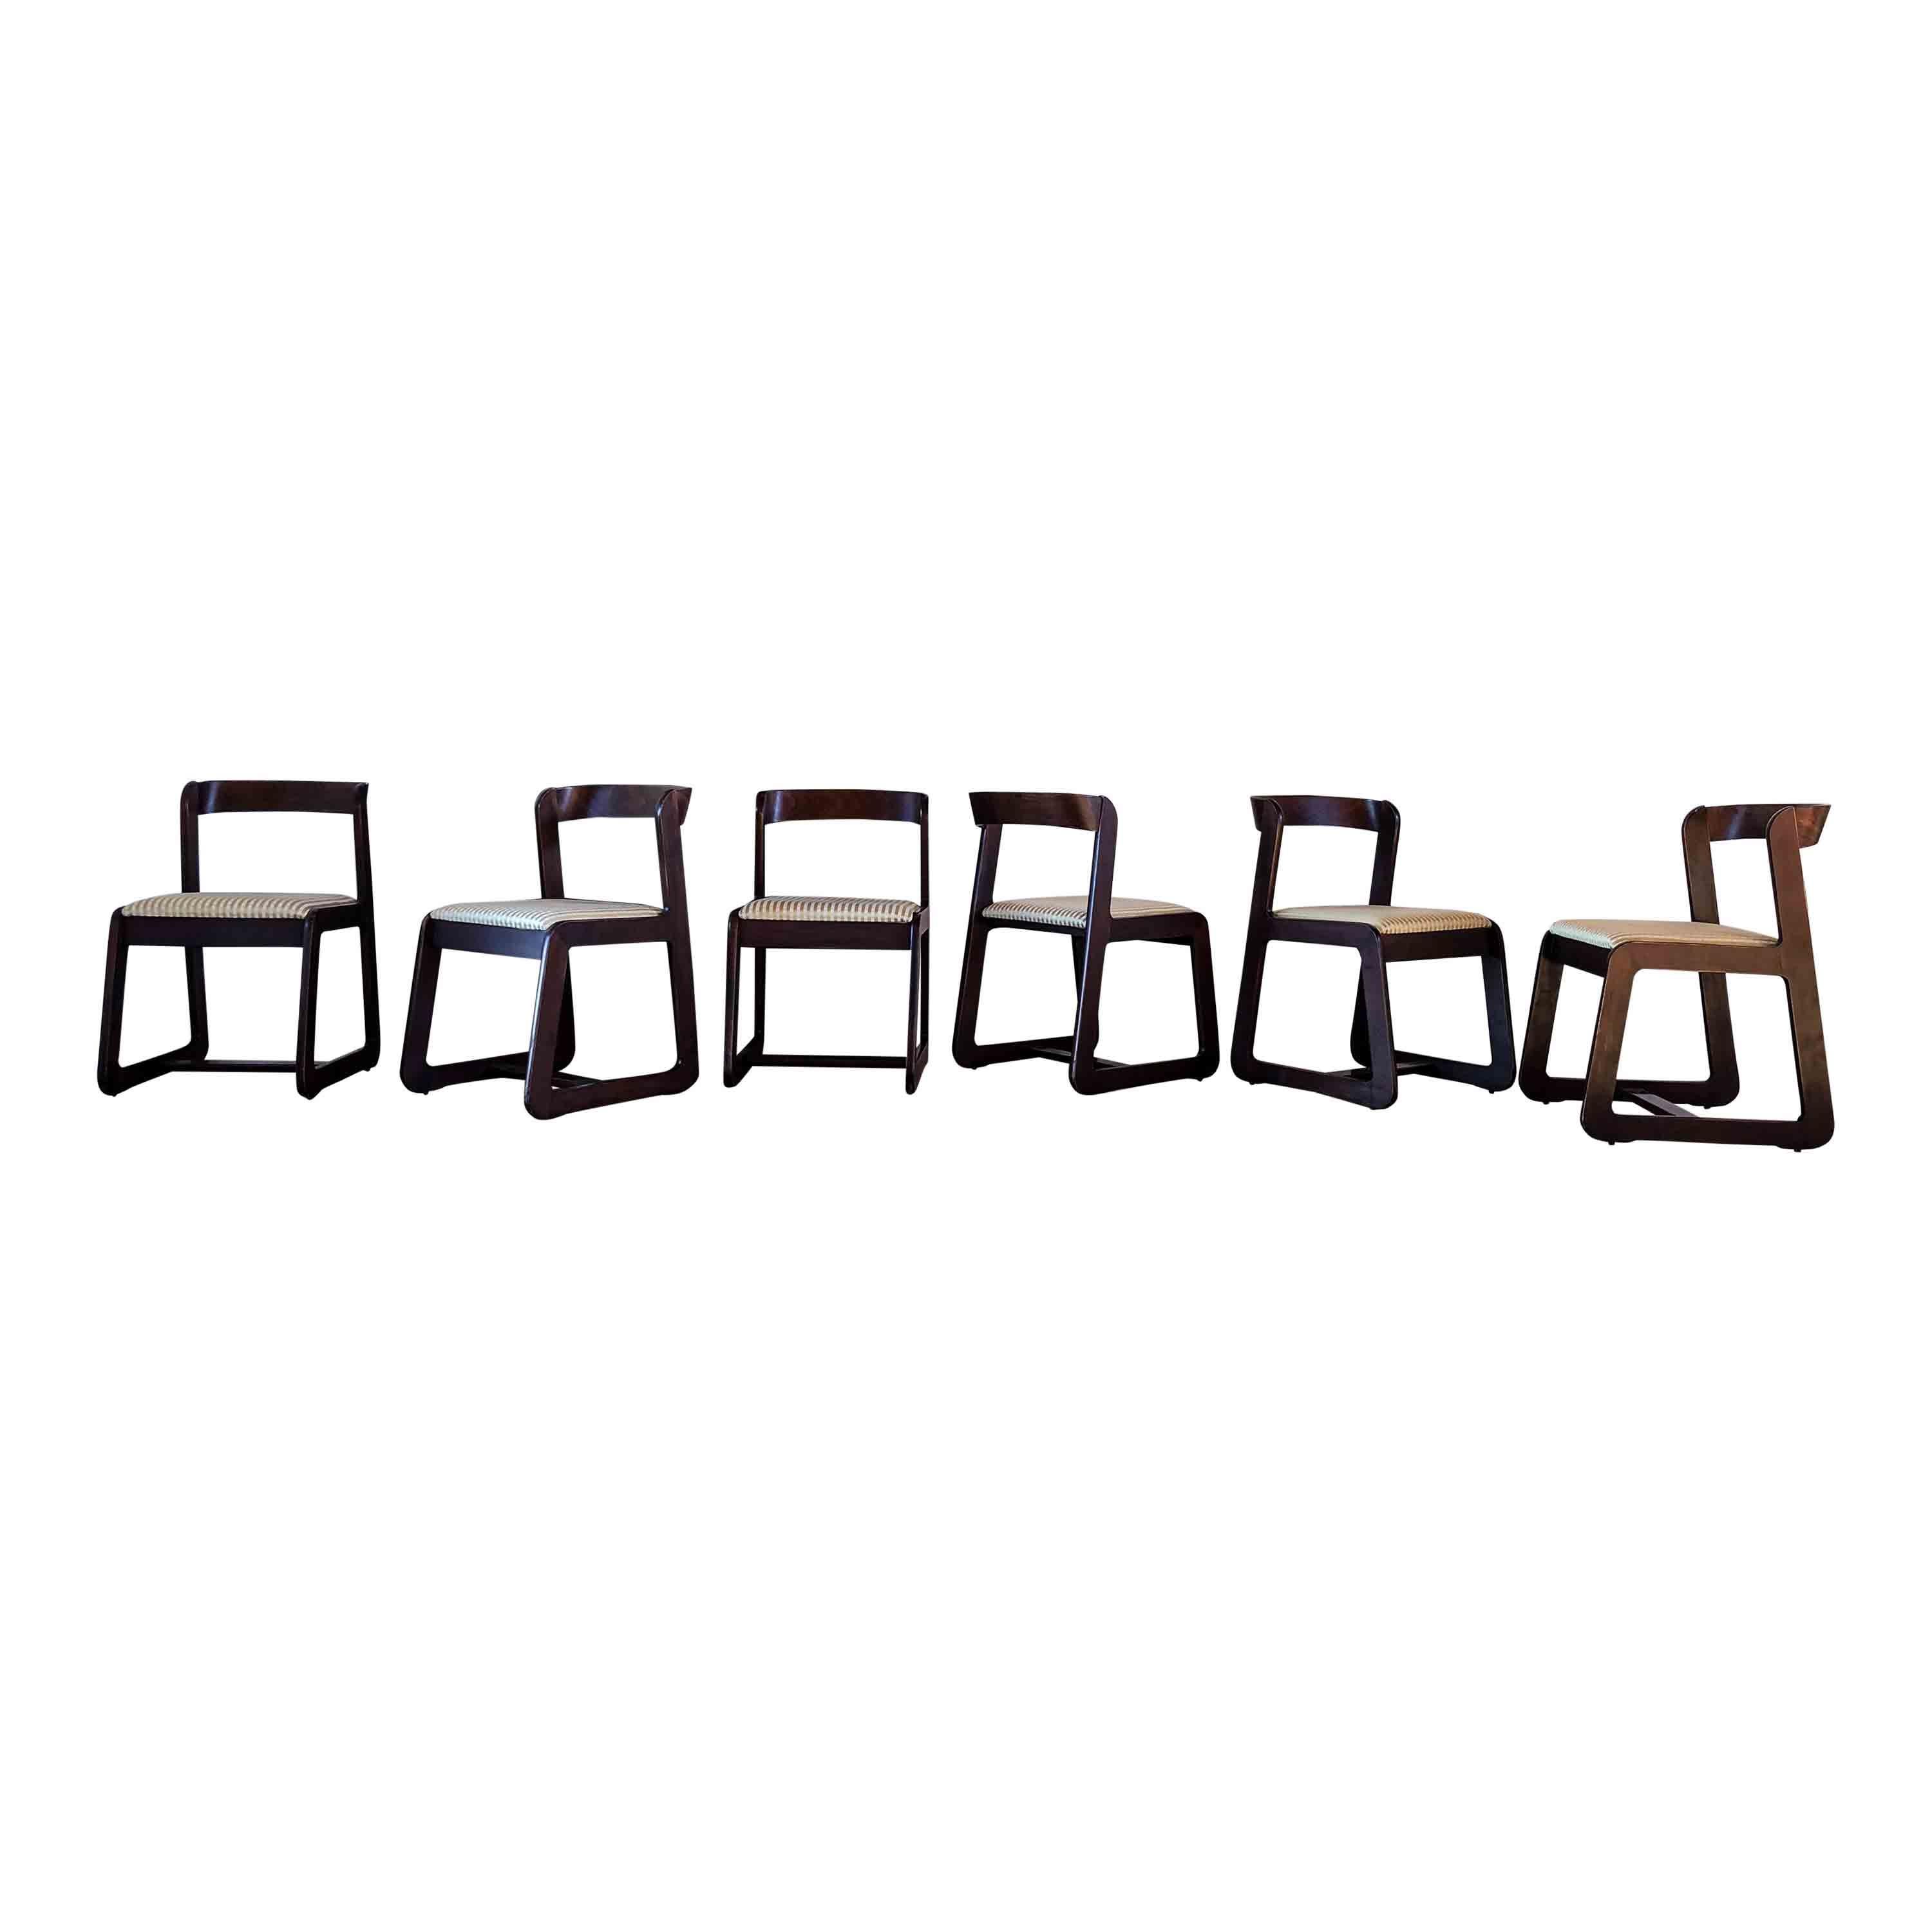 Set of 6 dining chairs designed by Willy Rizzo and manufactured by the Italian producer Mario Sabot in 1970.

Willy Rizzo, a renowned photographer, was not only a master of his craft but also a keen observer of design. In the late 1960s and early